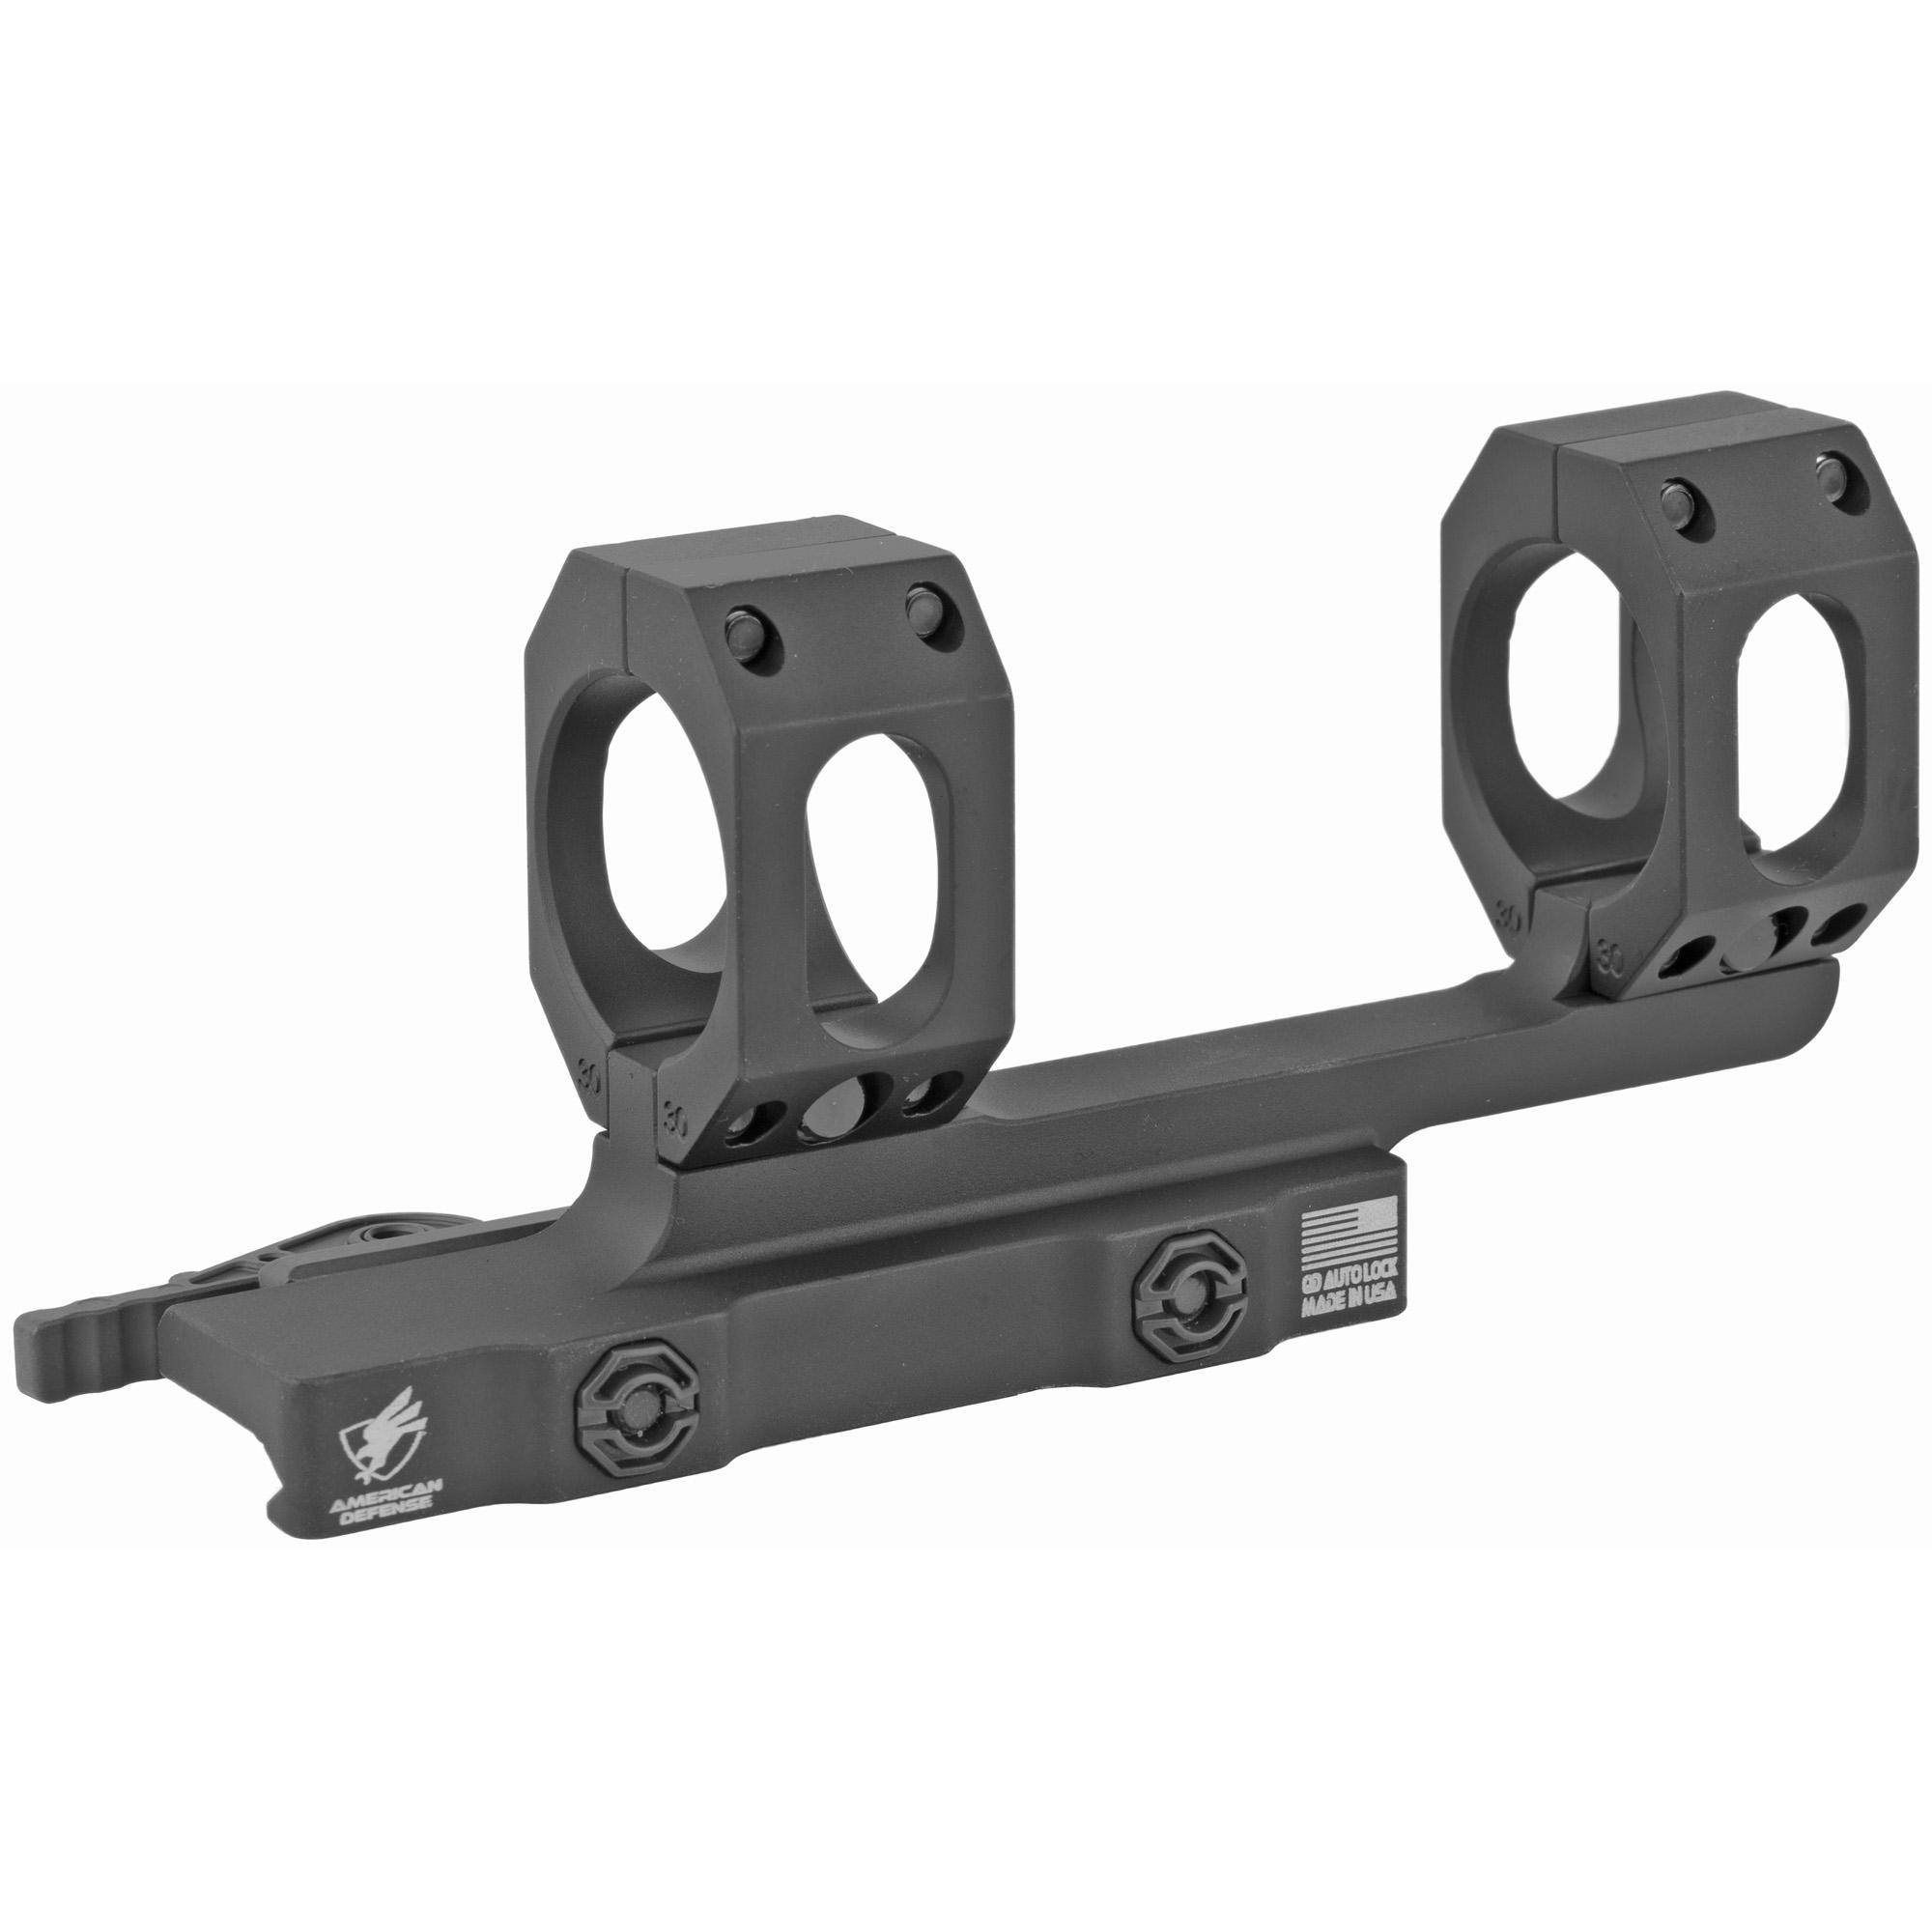 American Defense Mfg. American Defense Mfg. Scope Mount 30mm Dual Quick Release Ti